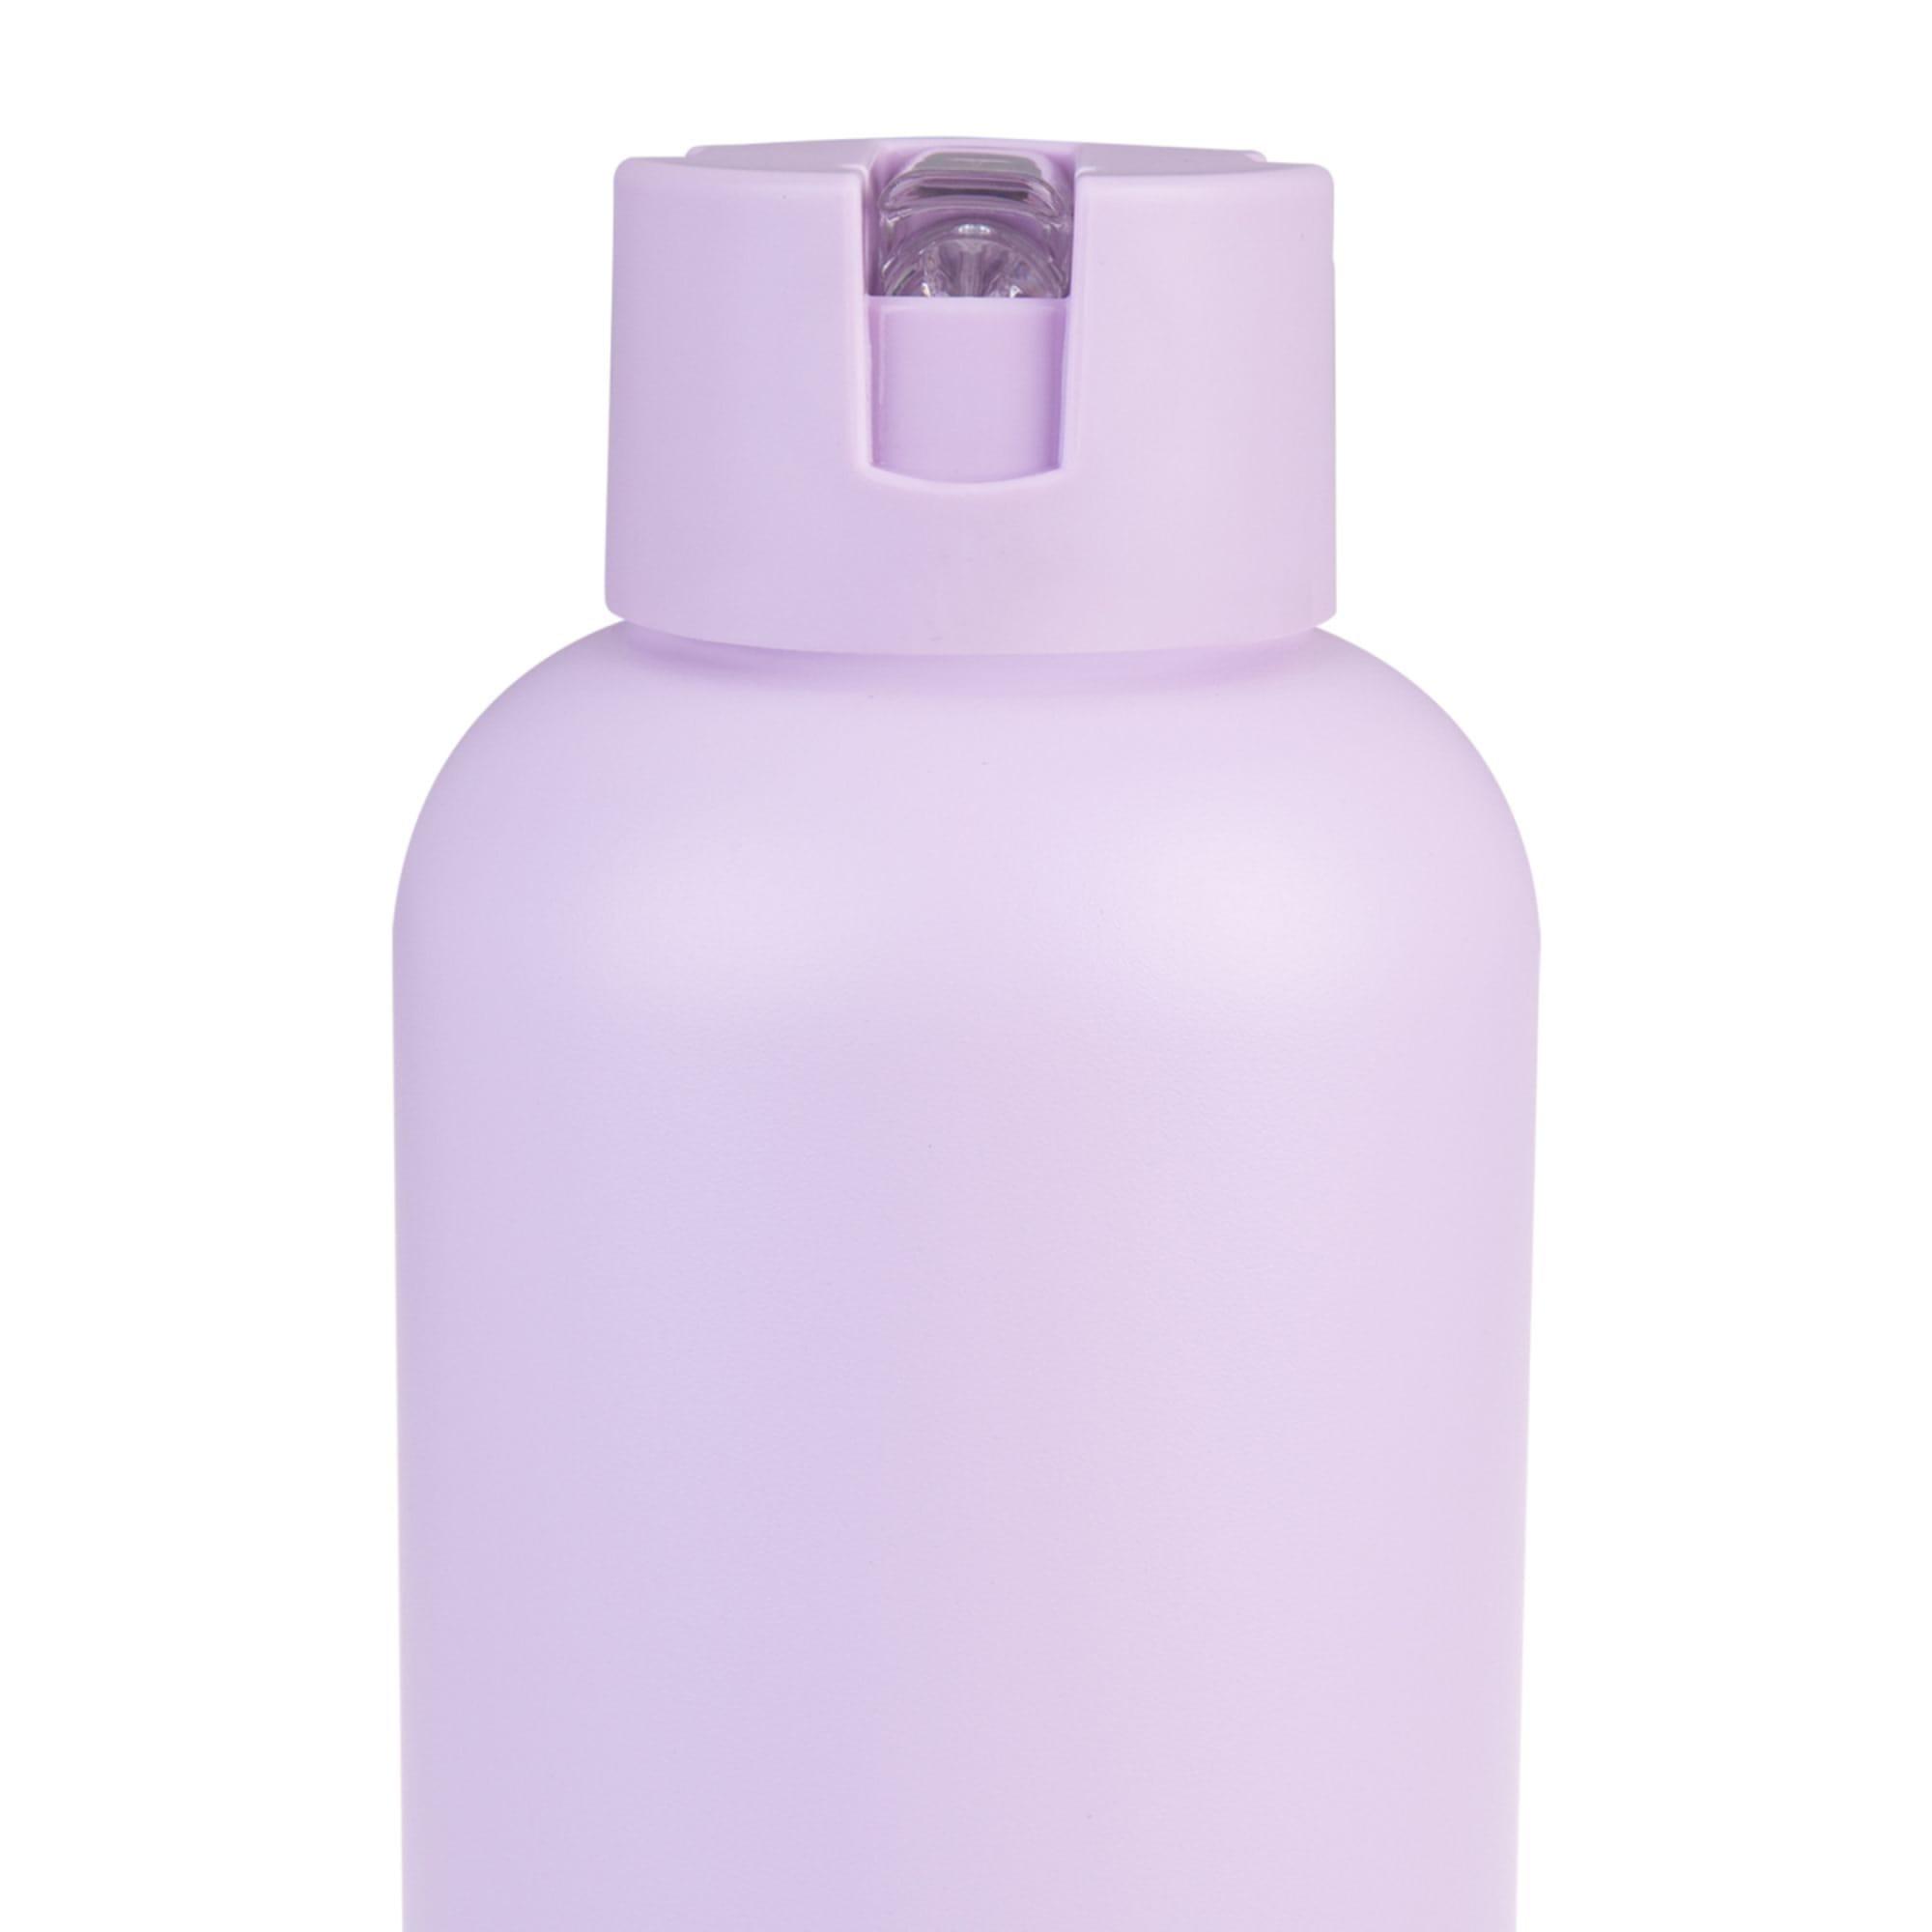 Oasis Moda Triple Wall Insulated Drink Bottle 1.5L Orchid Image 8